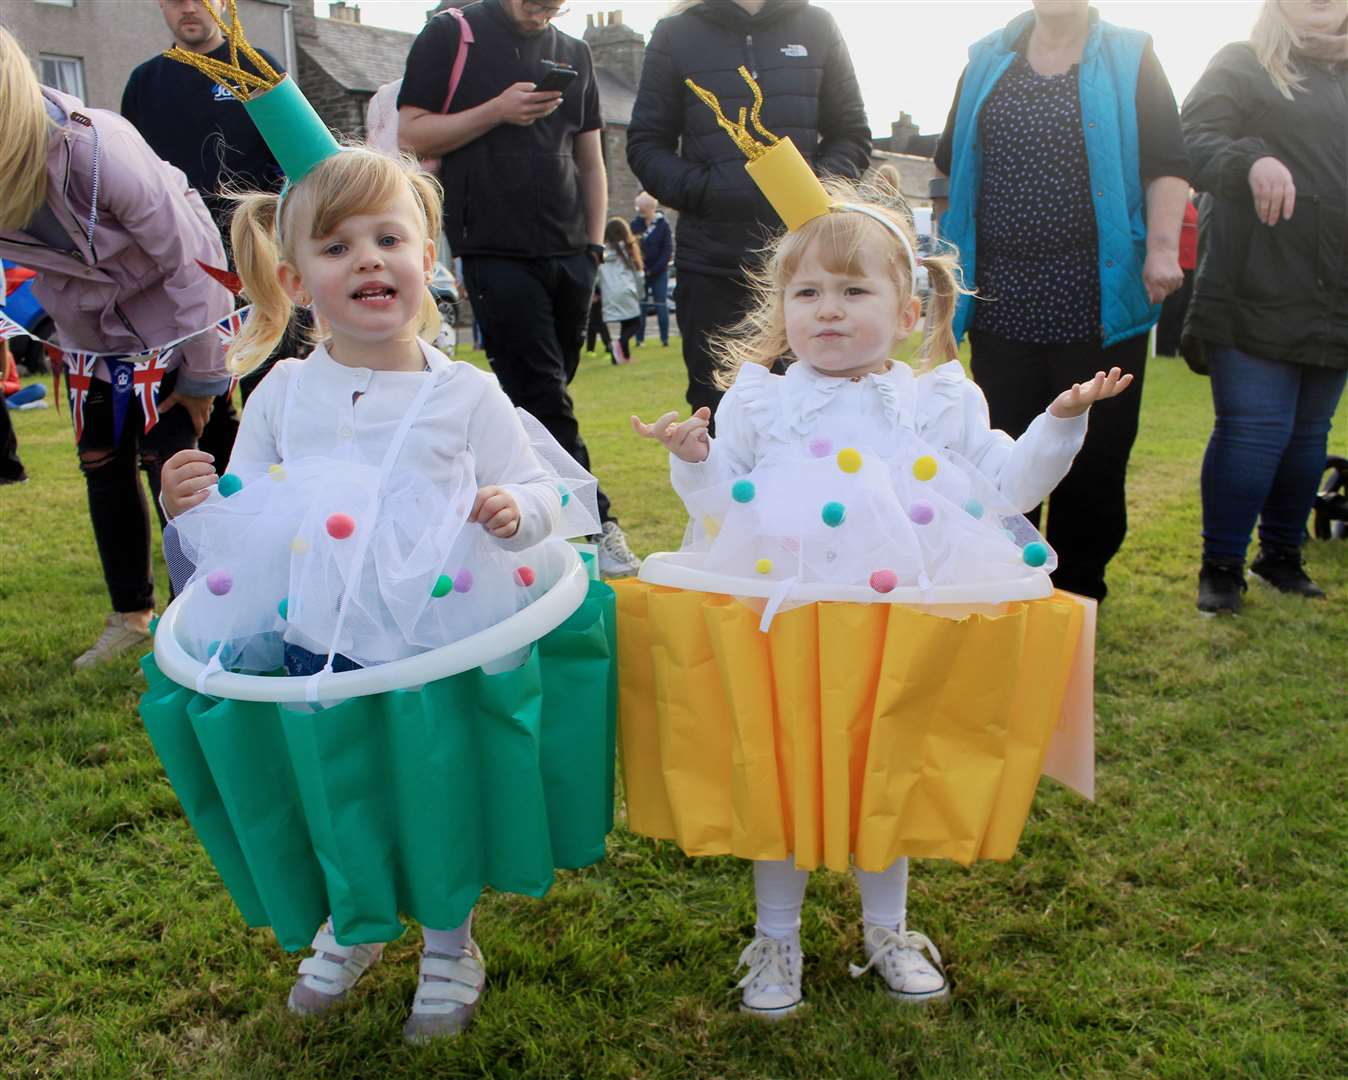 Three-year-olds Isobella Henderson (left) and Evie Manson were dressed as cupcakes.